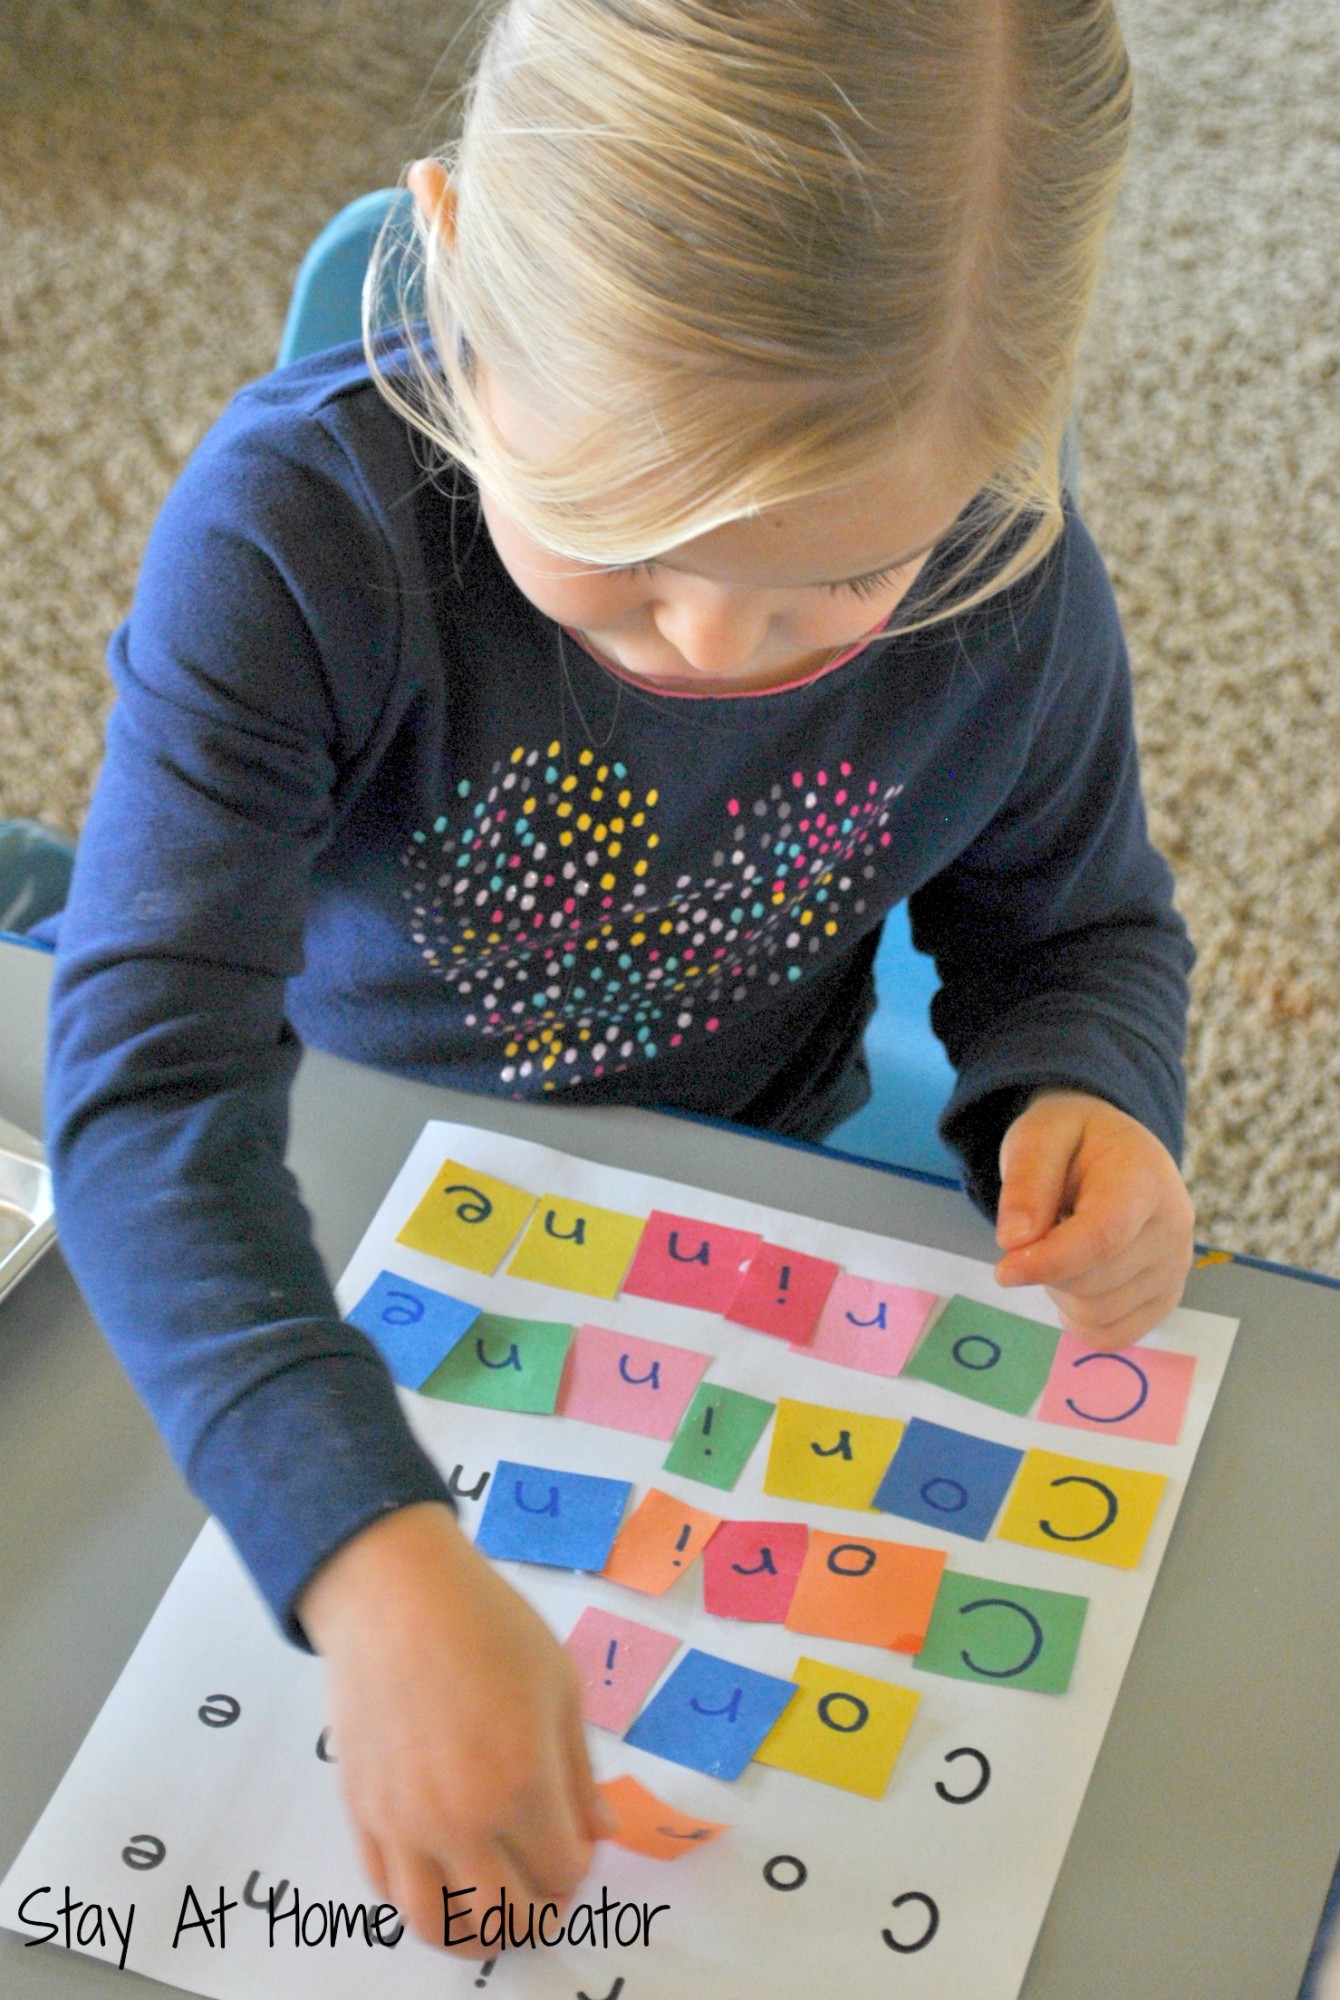 Letter tile names for name recognition in preschool - Stay At Home Educator